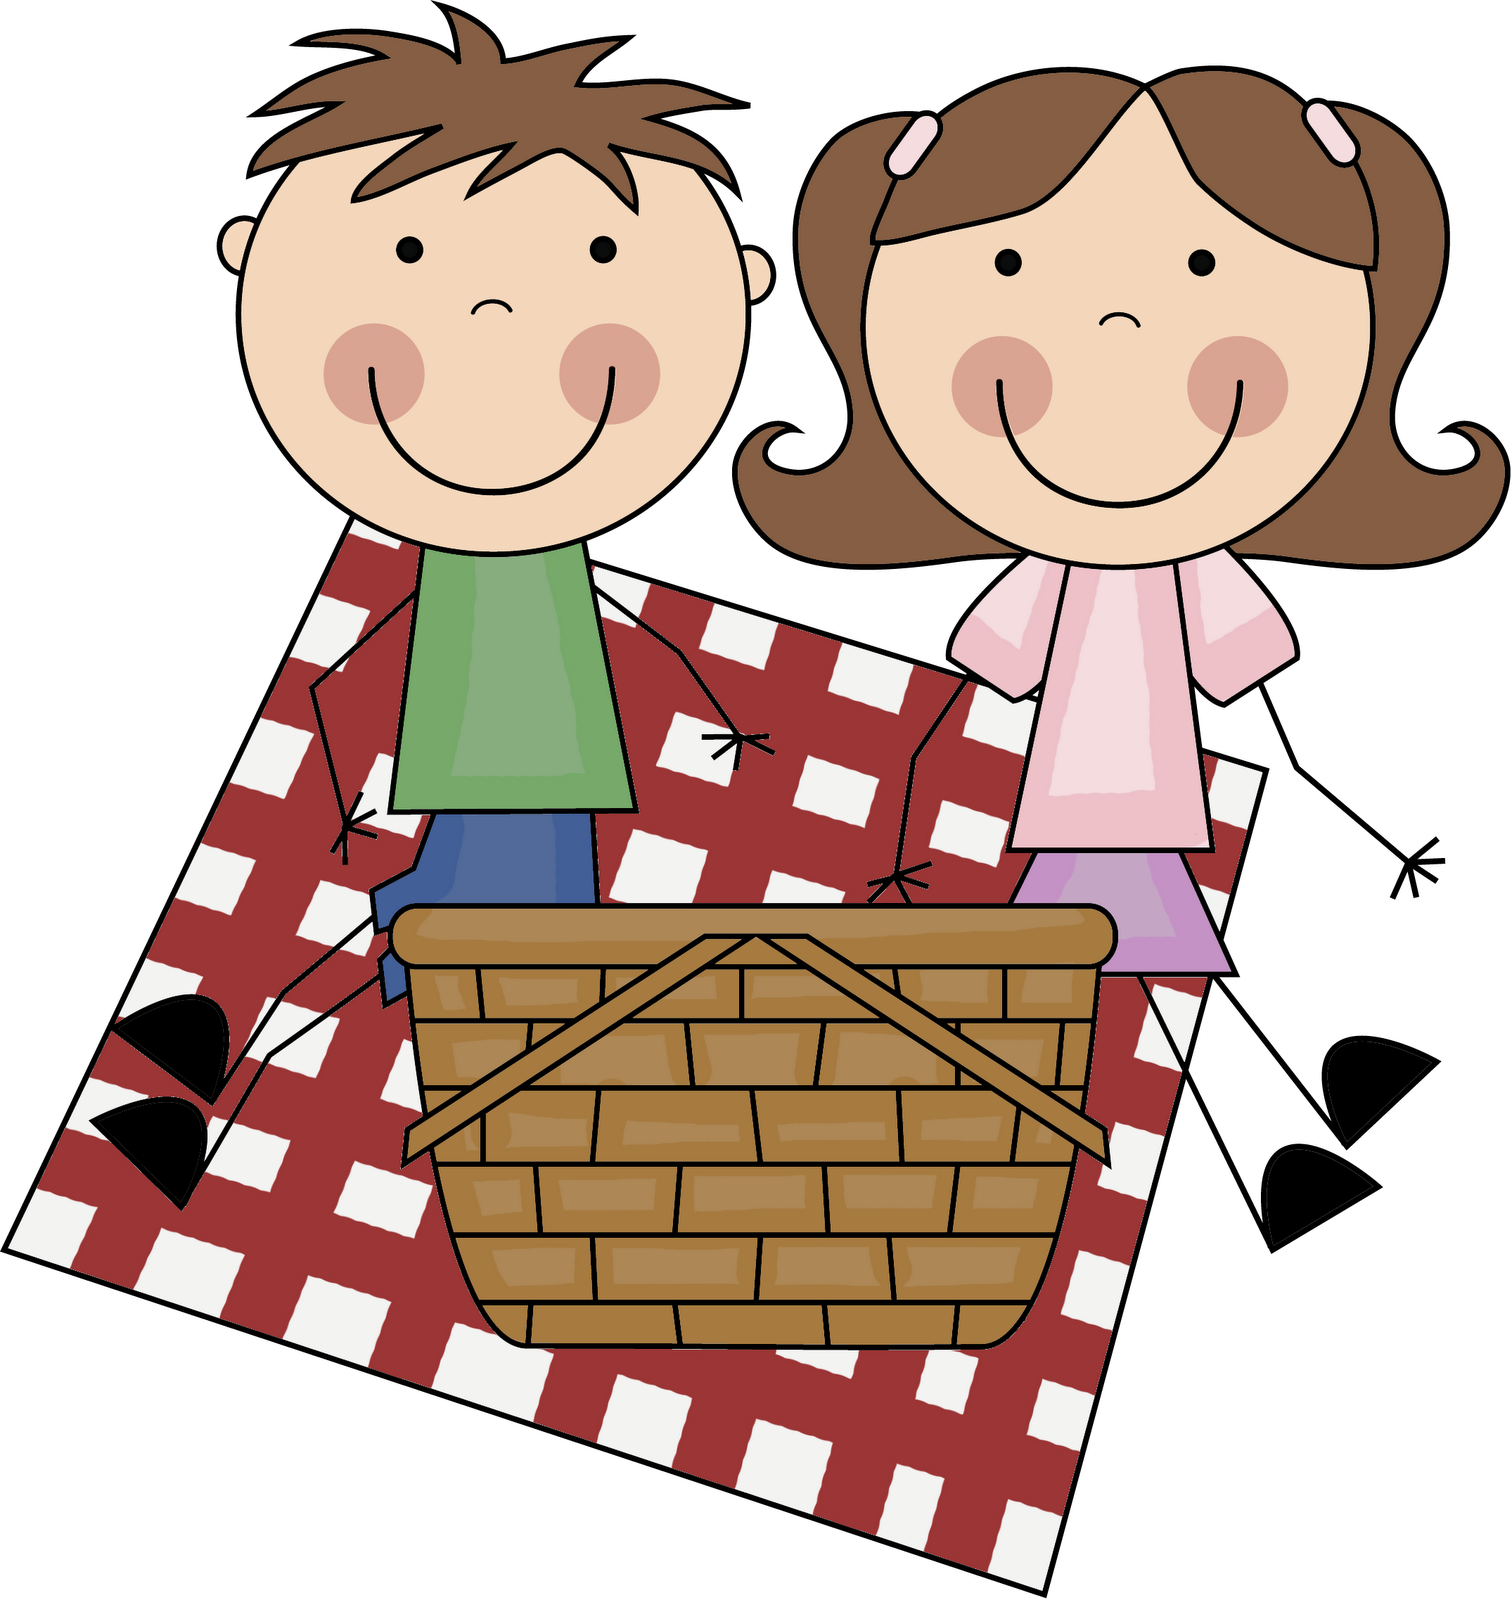 Church Picnic Images | Clipart library - Free Clipart Images